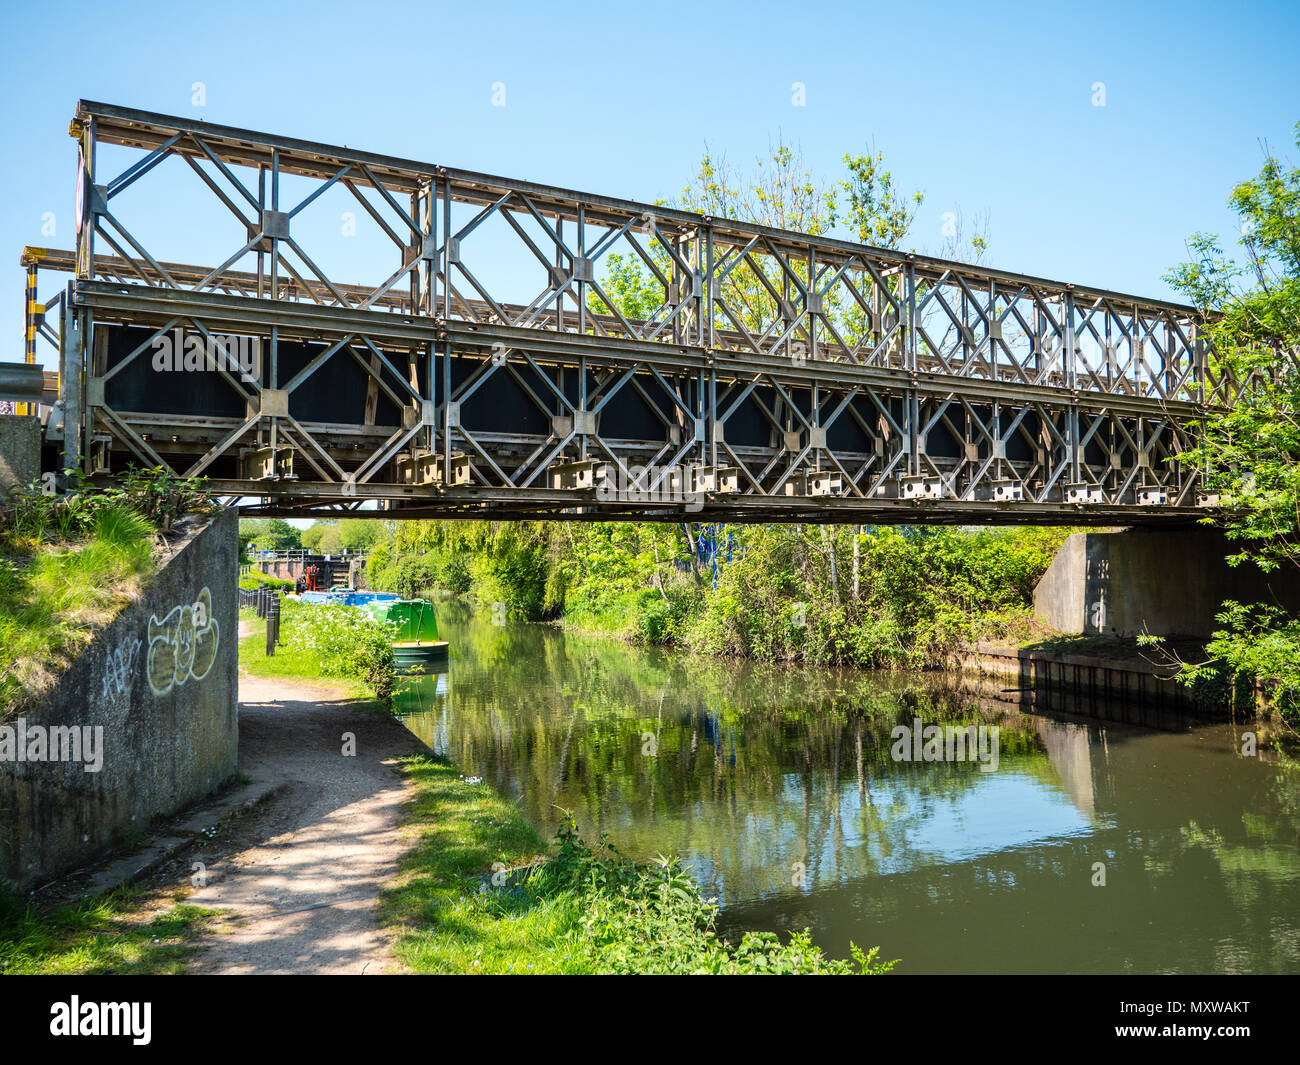 Industrial Bridge, Kennet and Avon Canal, nr Colthorp Lane, Colthorp, Thatcham, Berkshire, England, UK, GB. Stock Photo